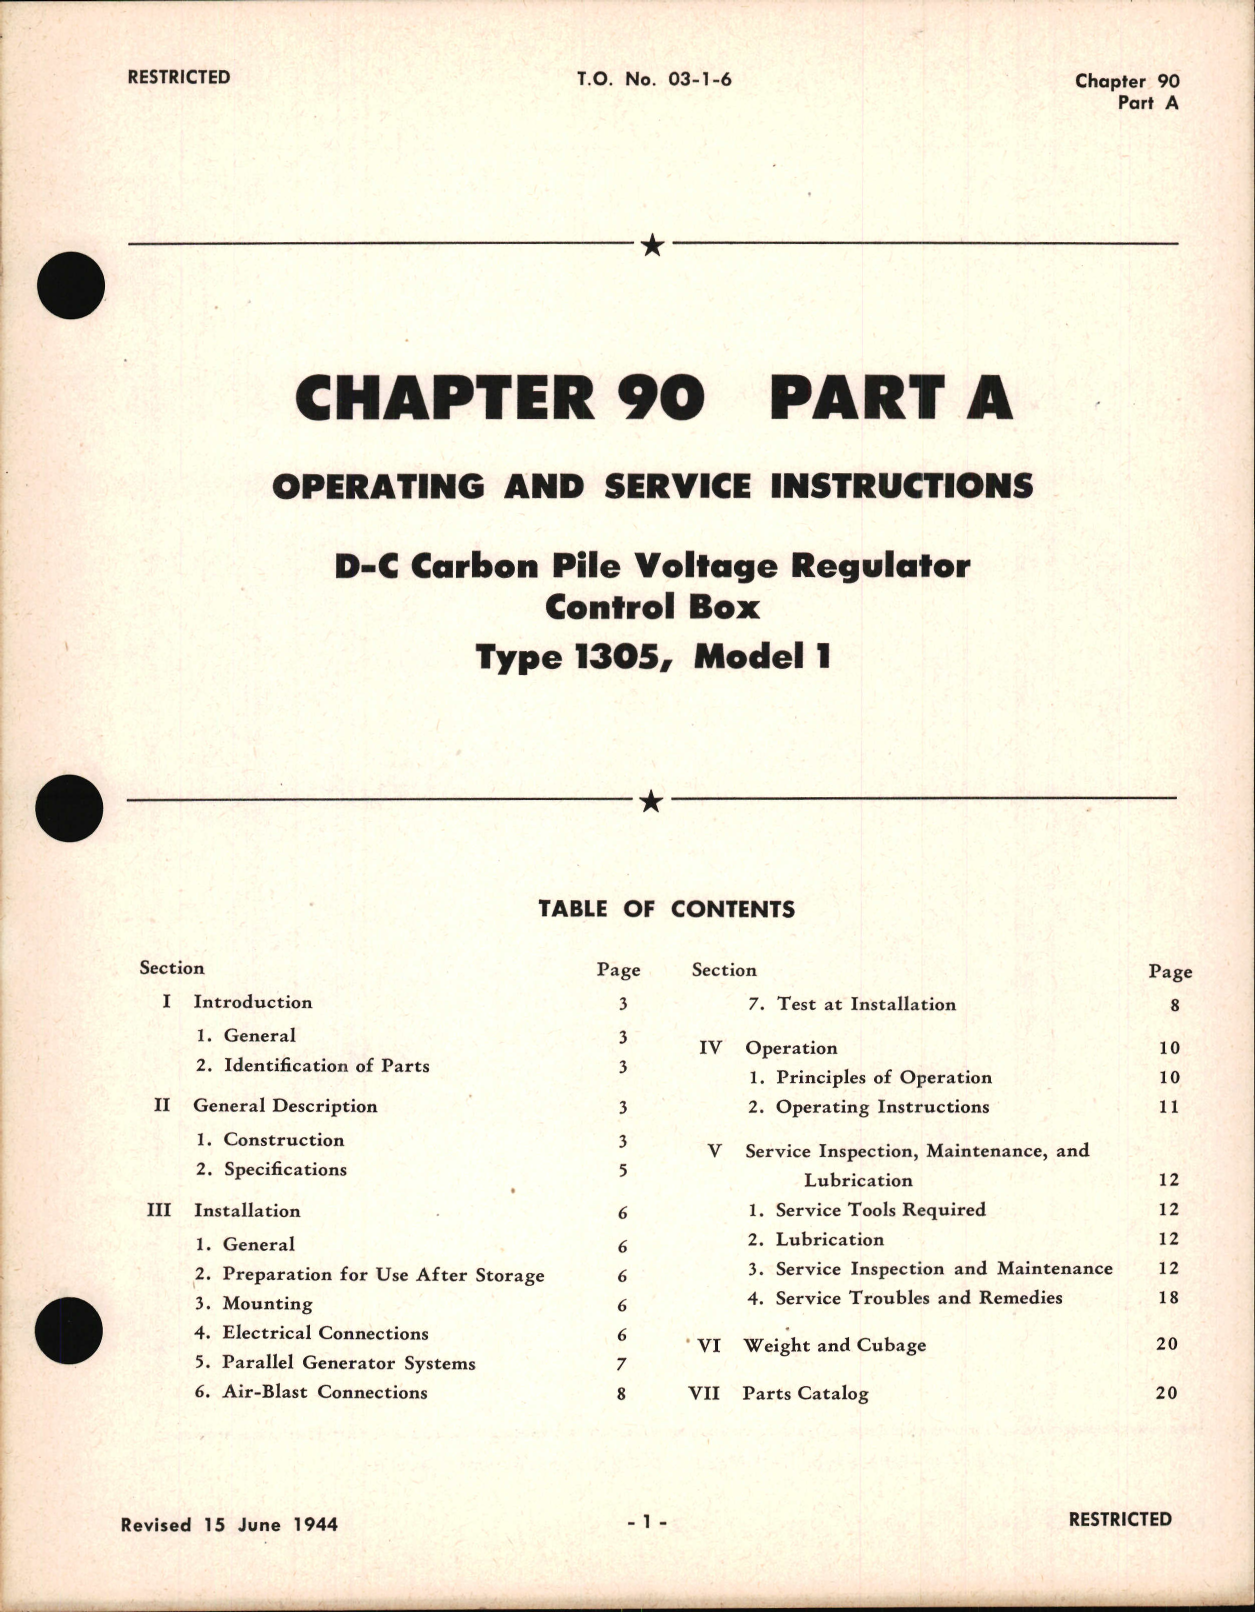 Sample page 1 from AirCorps Library document: Operating and Service Instructions for D-C Carbon Pile Voltage Regulator Control Box, Type 1305 Model 1, Ch 90 Part A